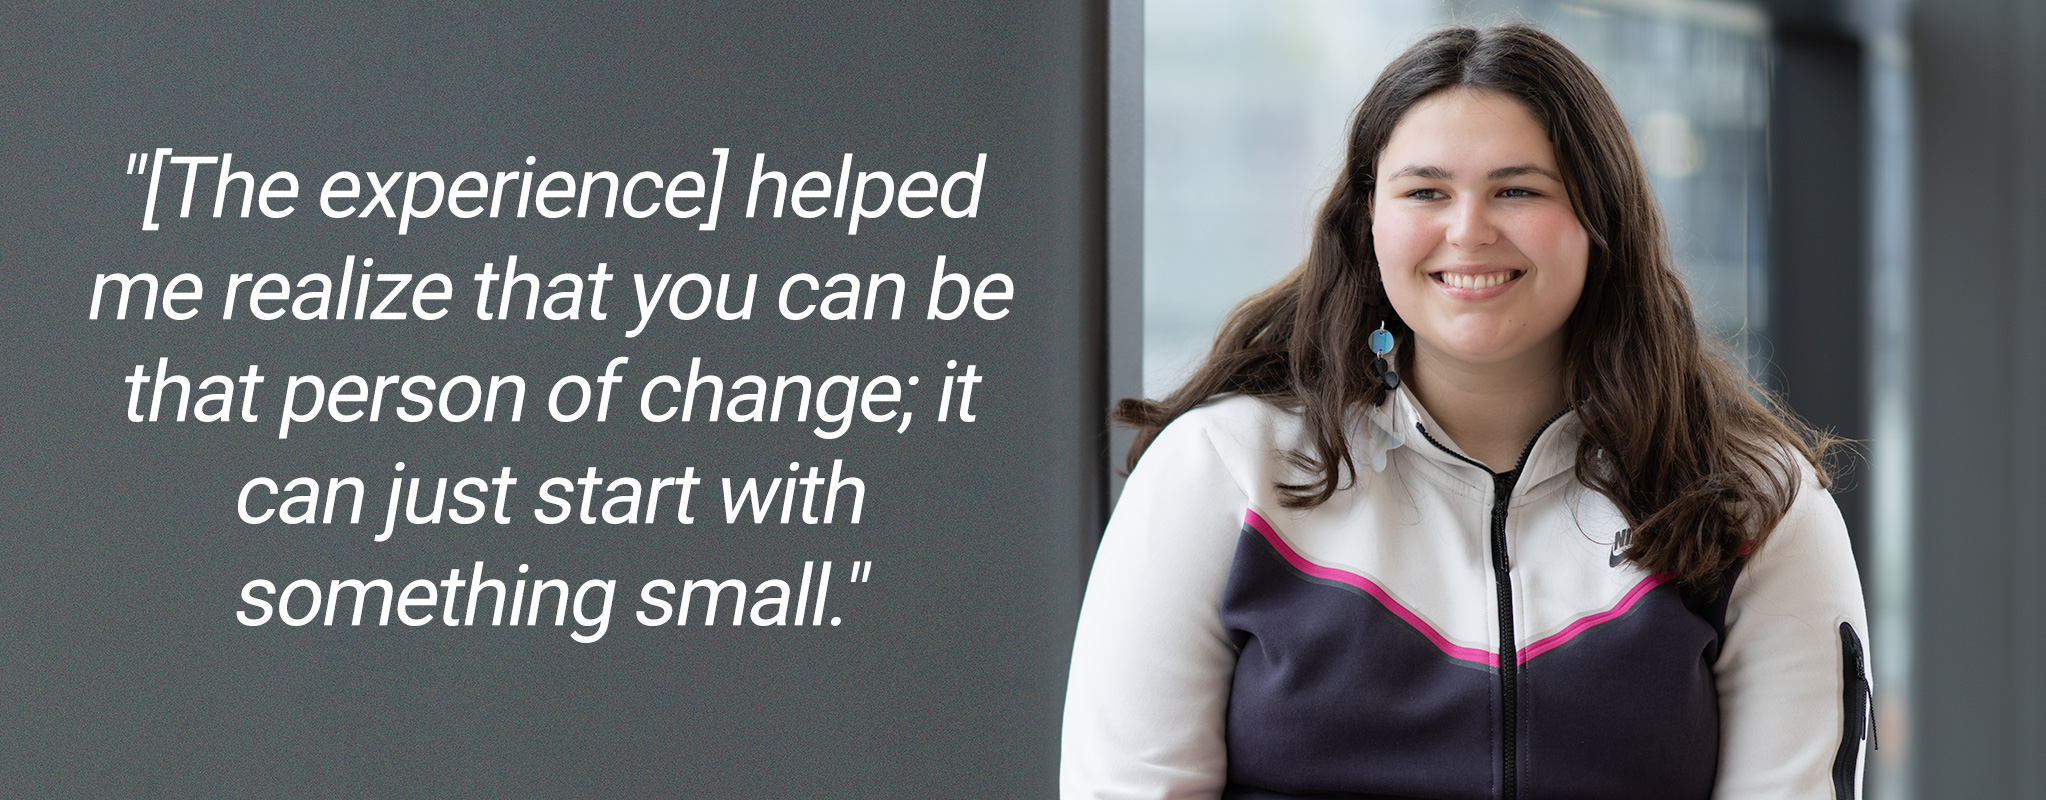 Kaitlynn McLeod smiling with text, "The experience helped me realize that you can be that person of change; it can just start with something small."